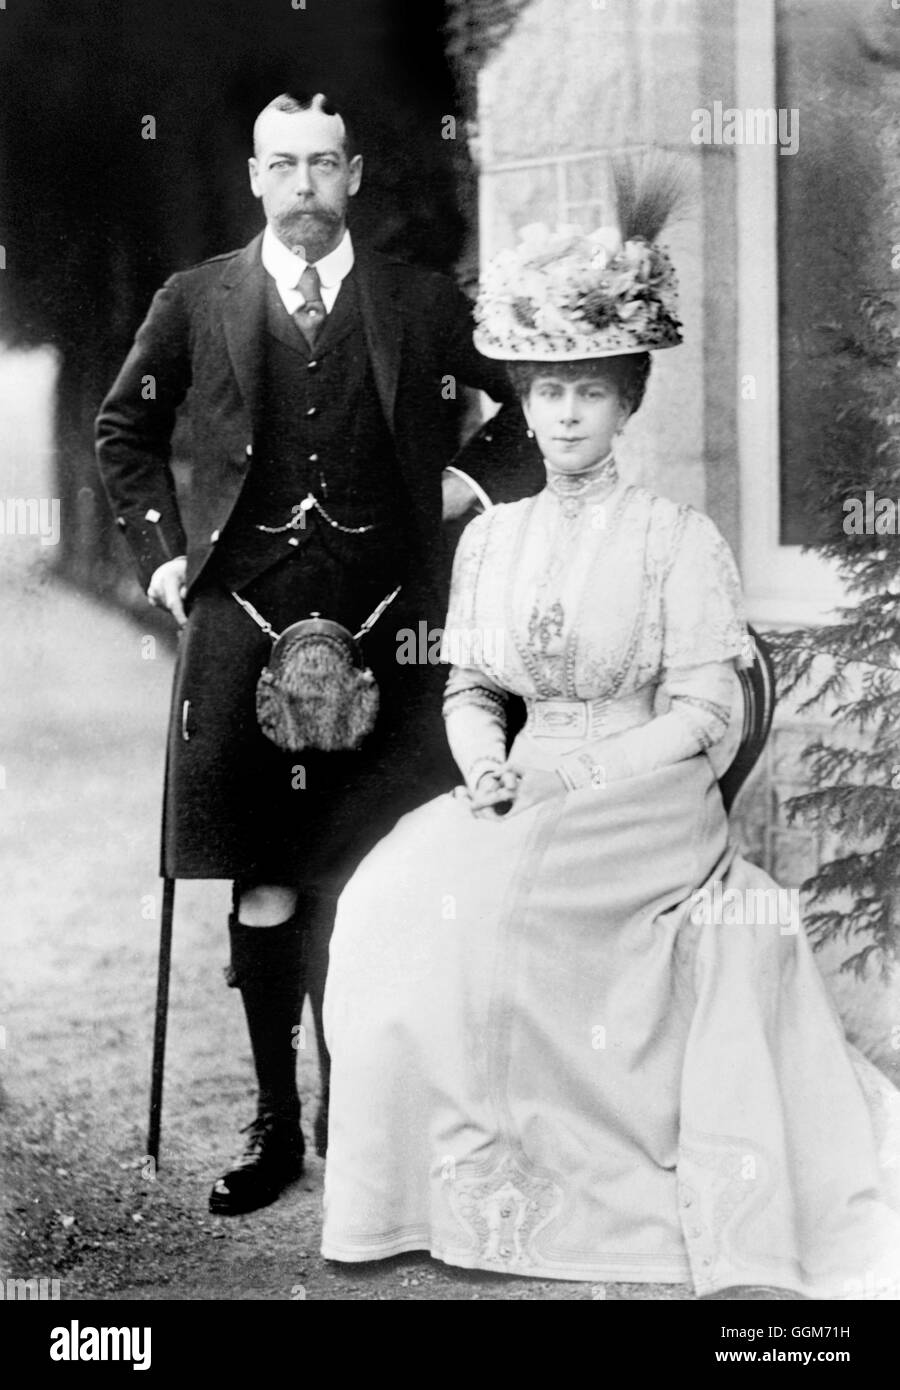 King George V (1865-1936) and his wife, Queen Mary (Mary of Teck: 1867-1953), taken when he was Prince of Wales. George V reigned from 1910 to 1936. Photo from Bains News Service, c1909. Stock Photo